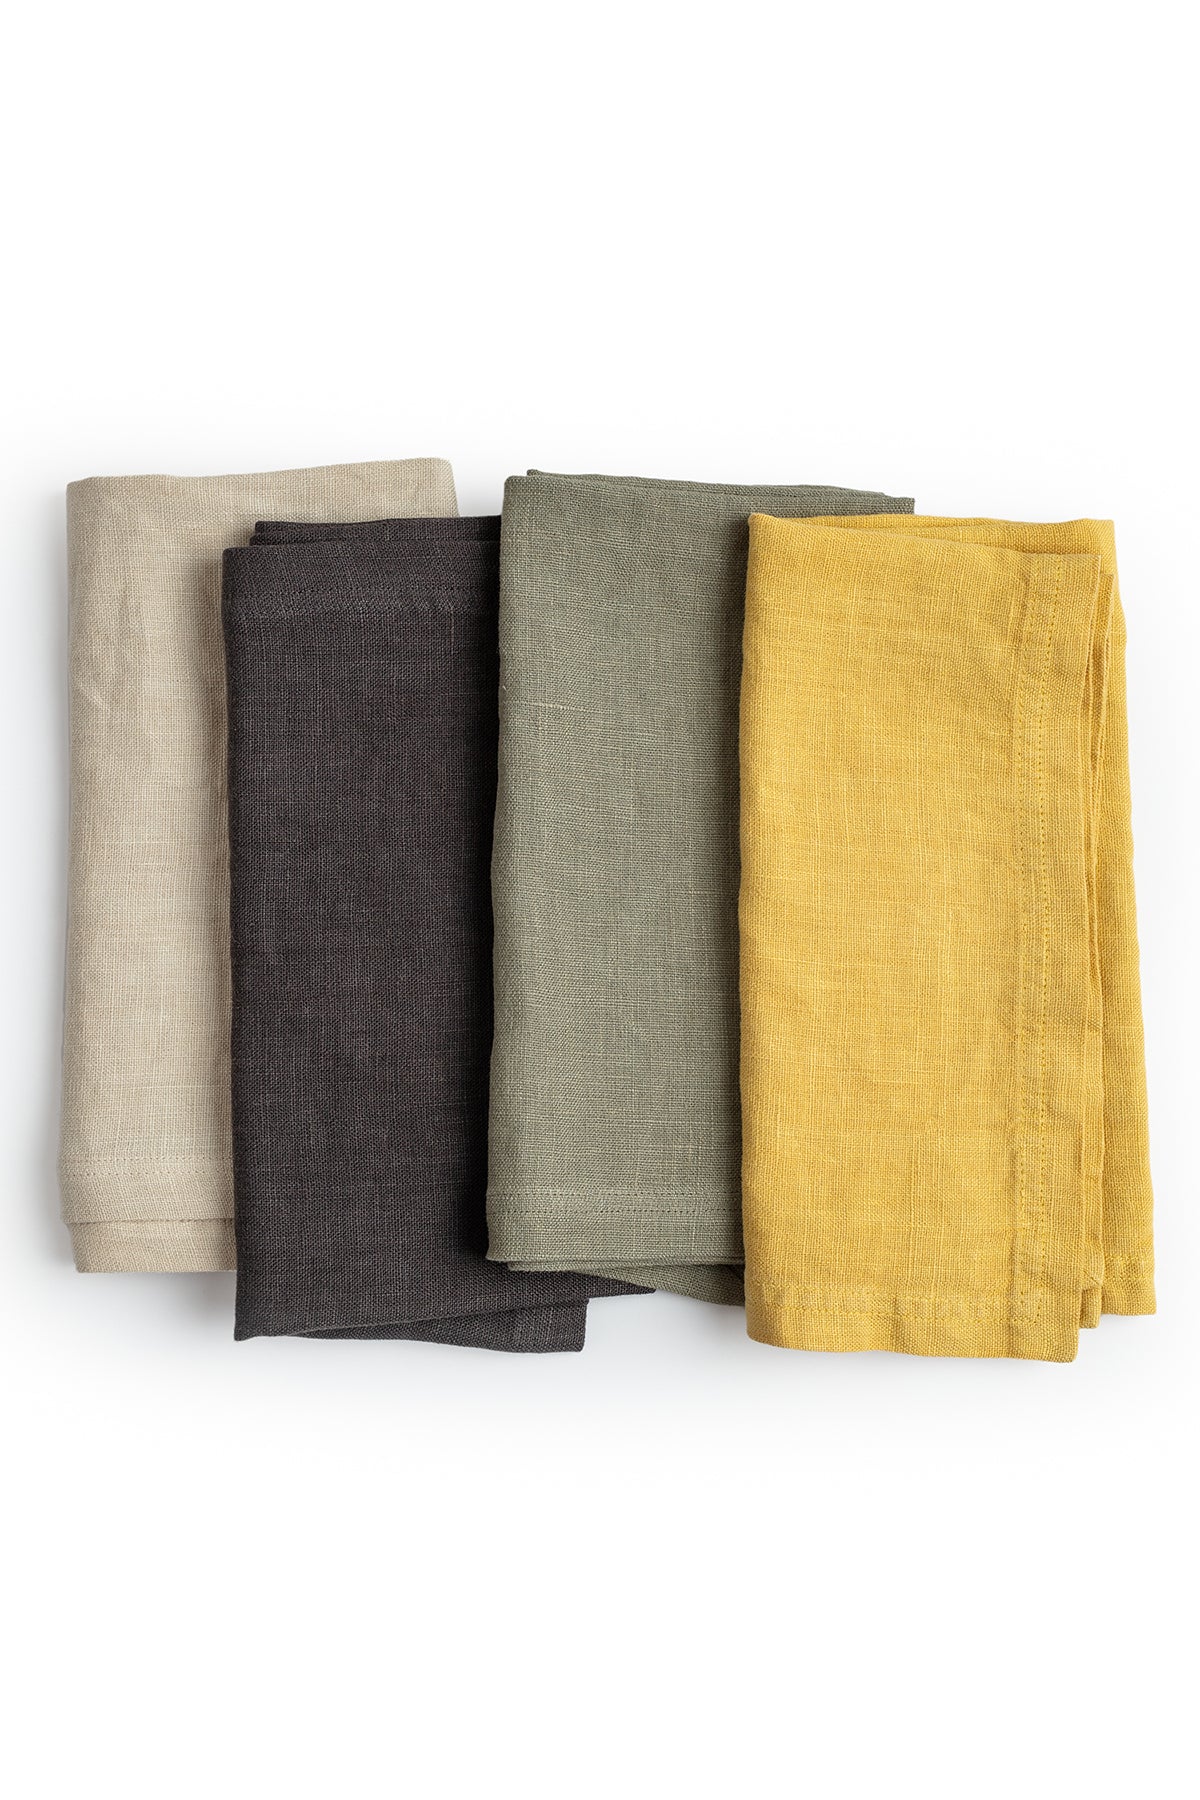 Four elegant Jenny Graham Home linen napkins in beige, charcoal, olive green, and mustard yellow, neatly folded and stacked on a white background.-15073421230273